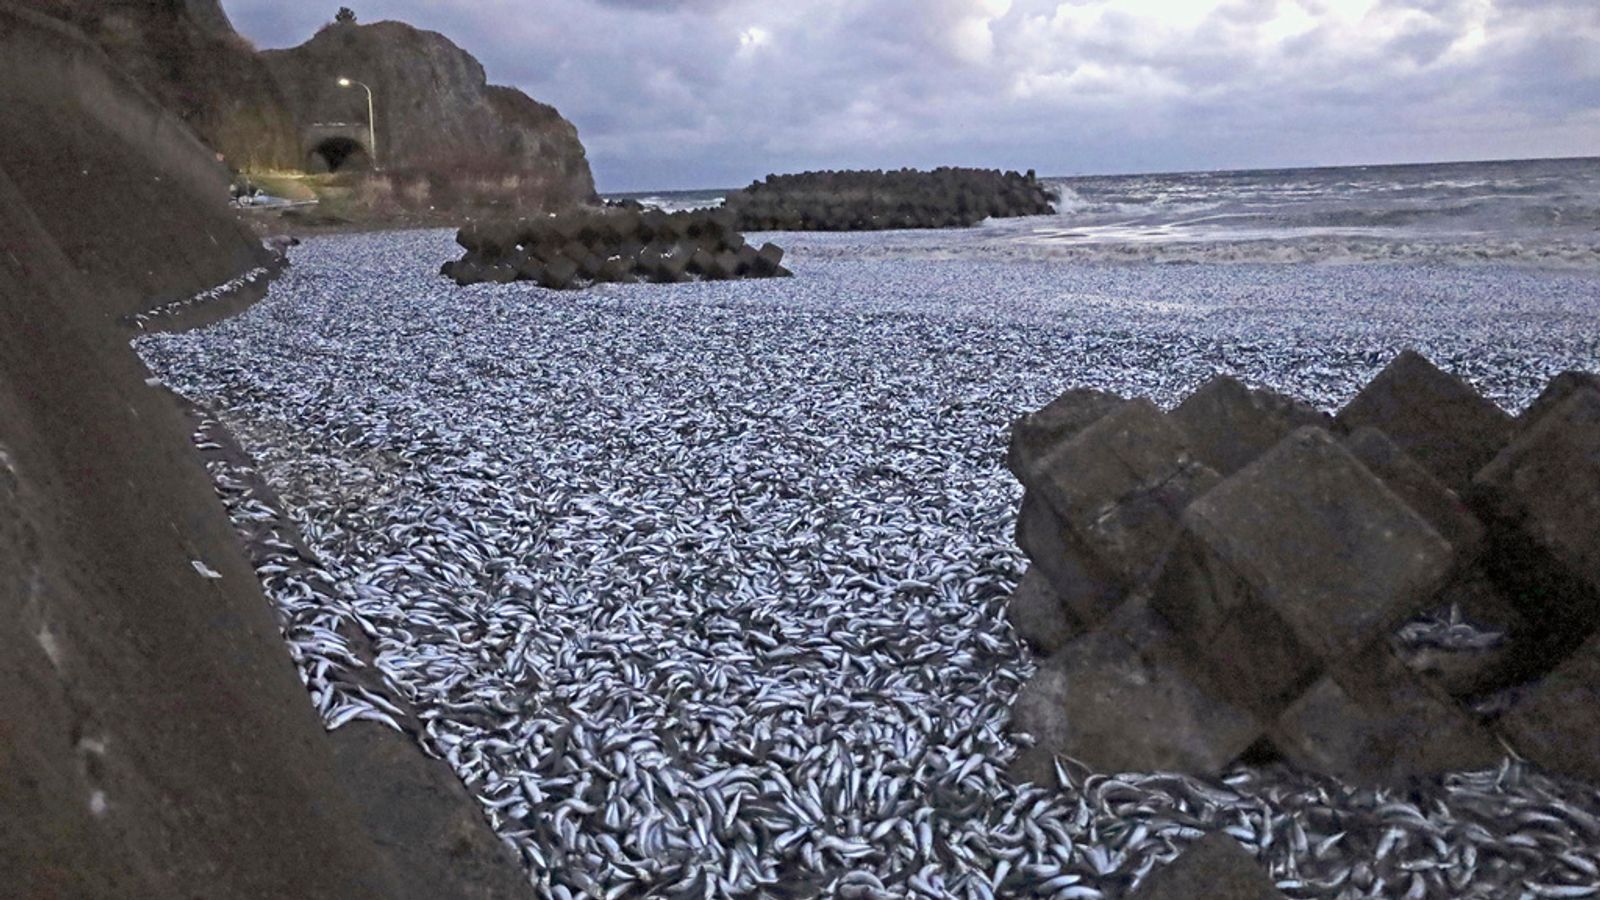 Thousand of dead fish wash up on beach in Japan